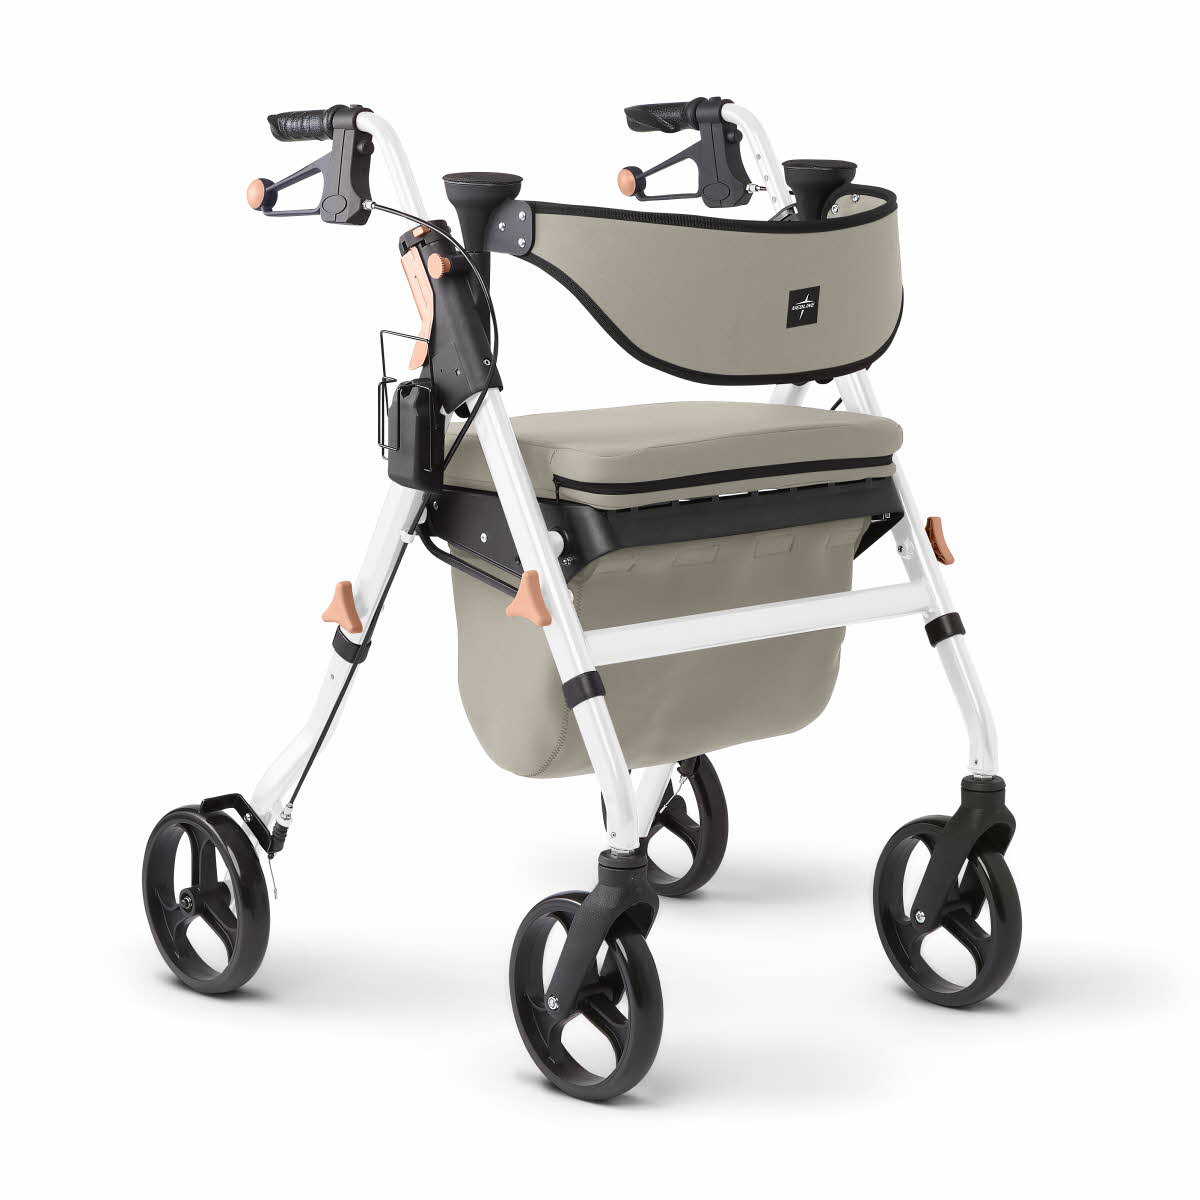 Medline Empower Rollator, Antimicrobial, White